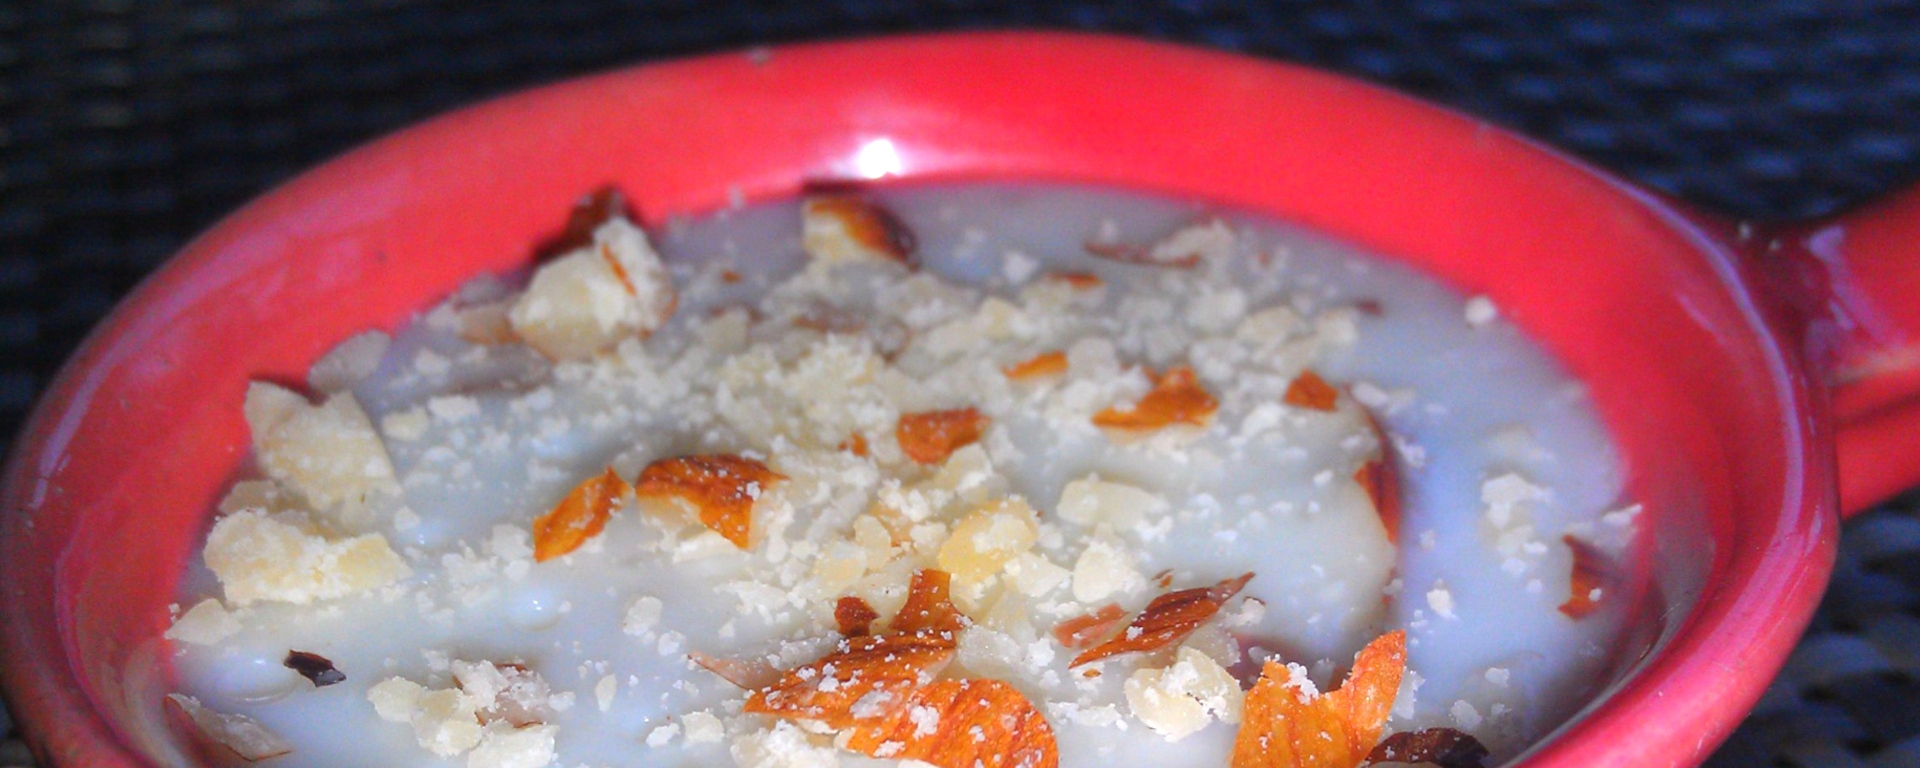 LuvMyRecipe.com - Bengali Style Cottage Cheese and Milk Pudding Featured